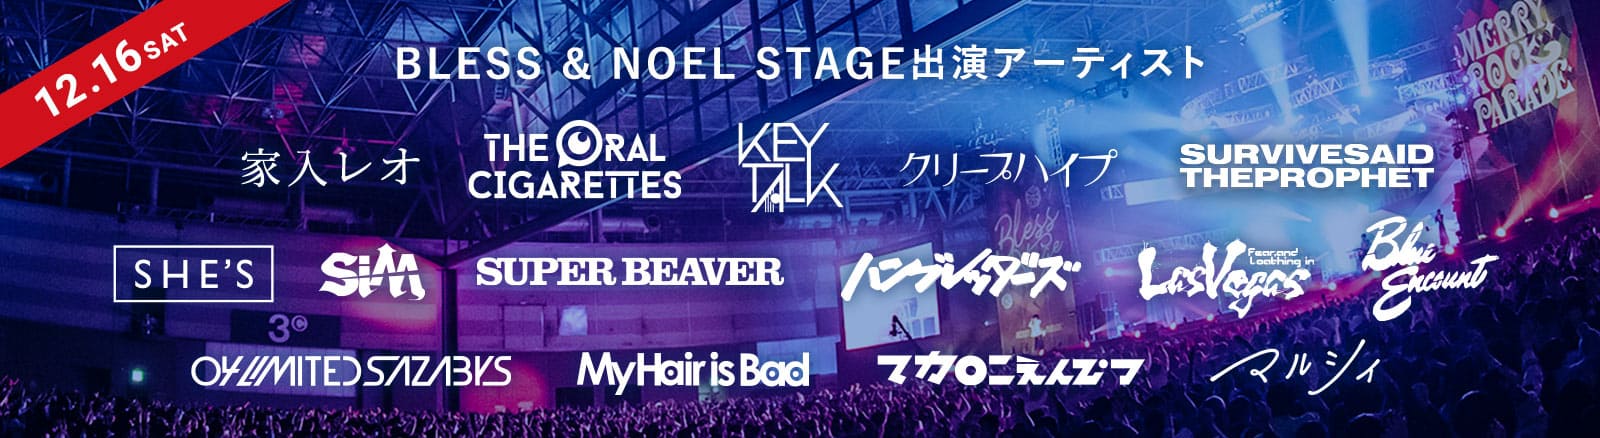 12/16SAT BLESS & NOEL STAGE出演アーティスト